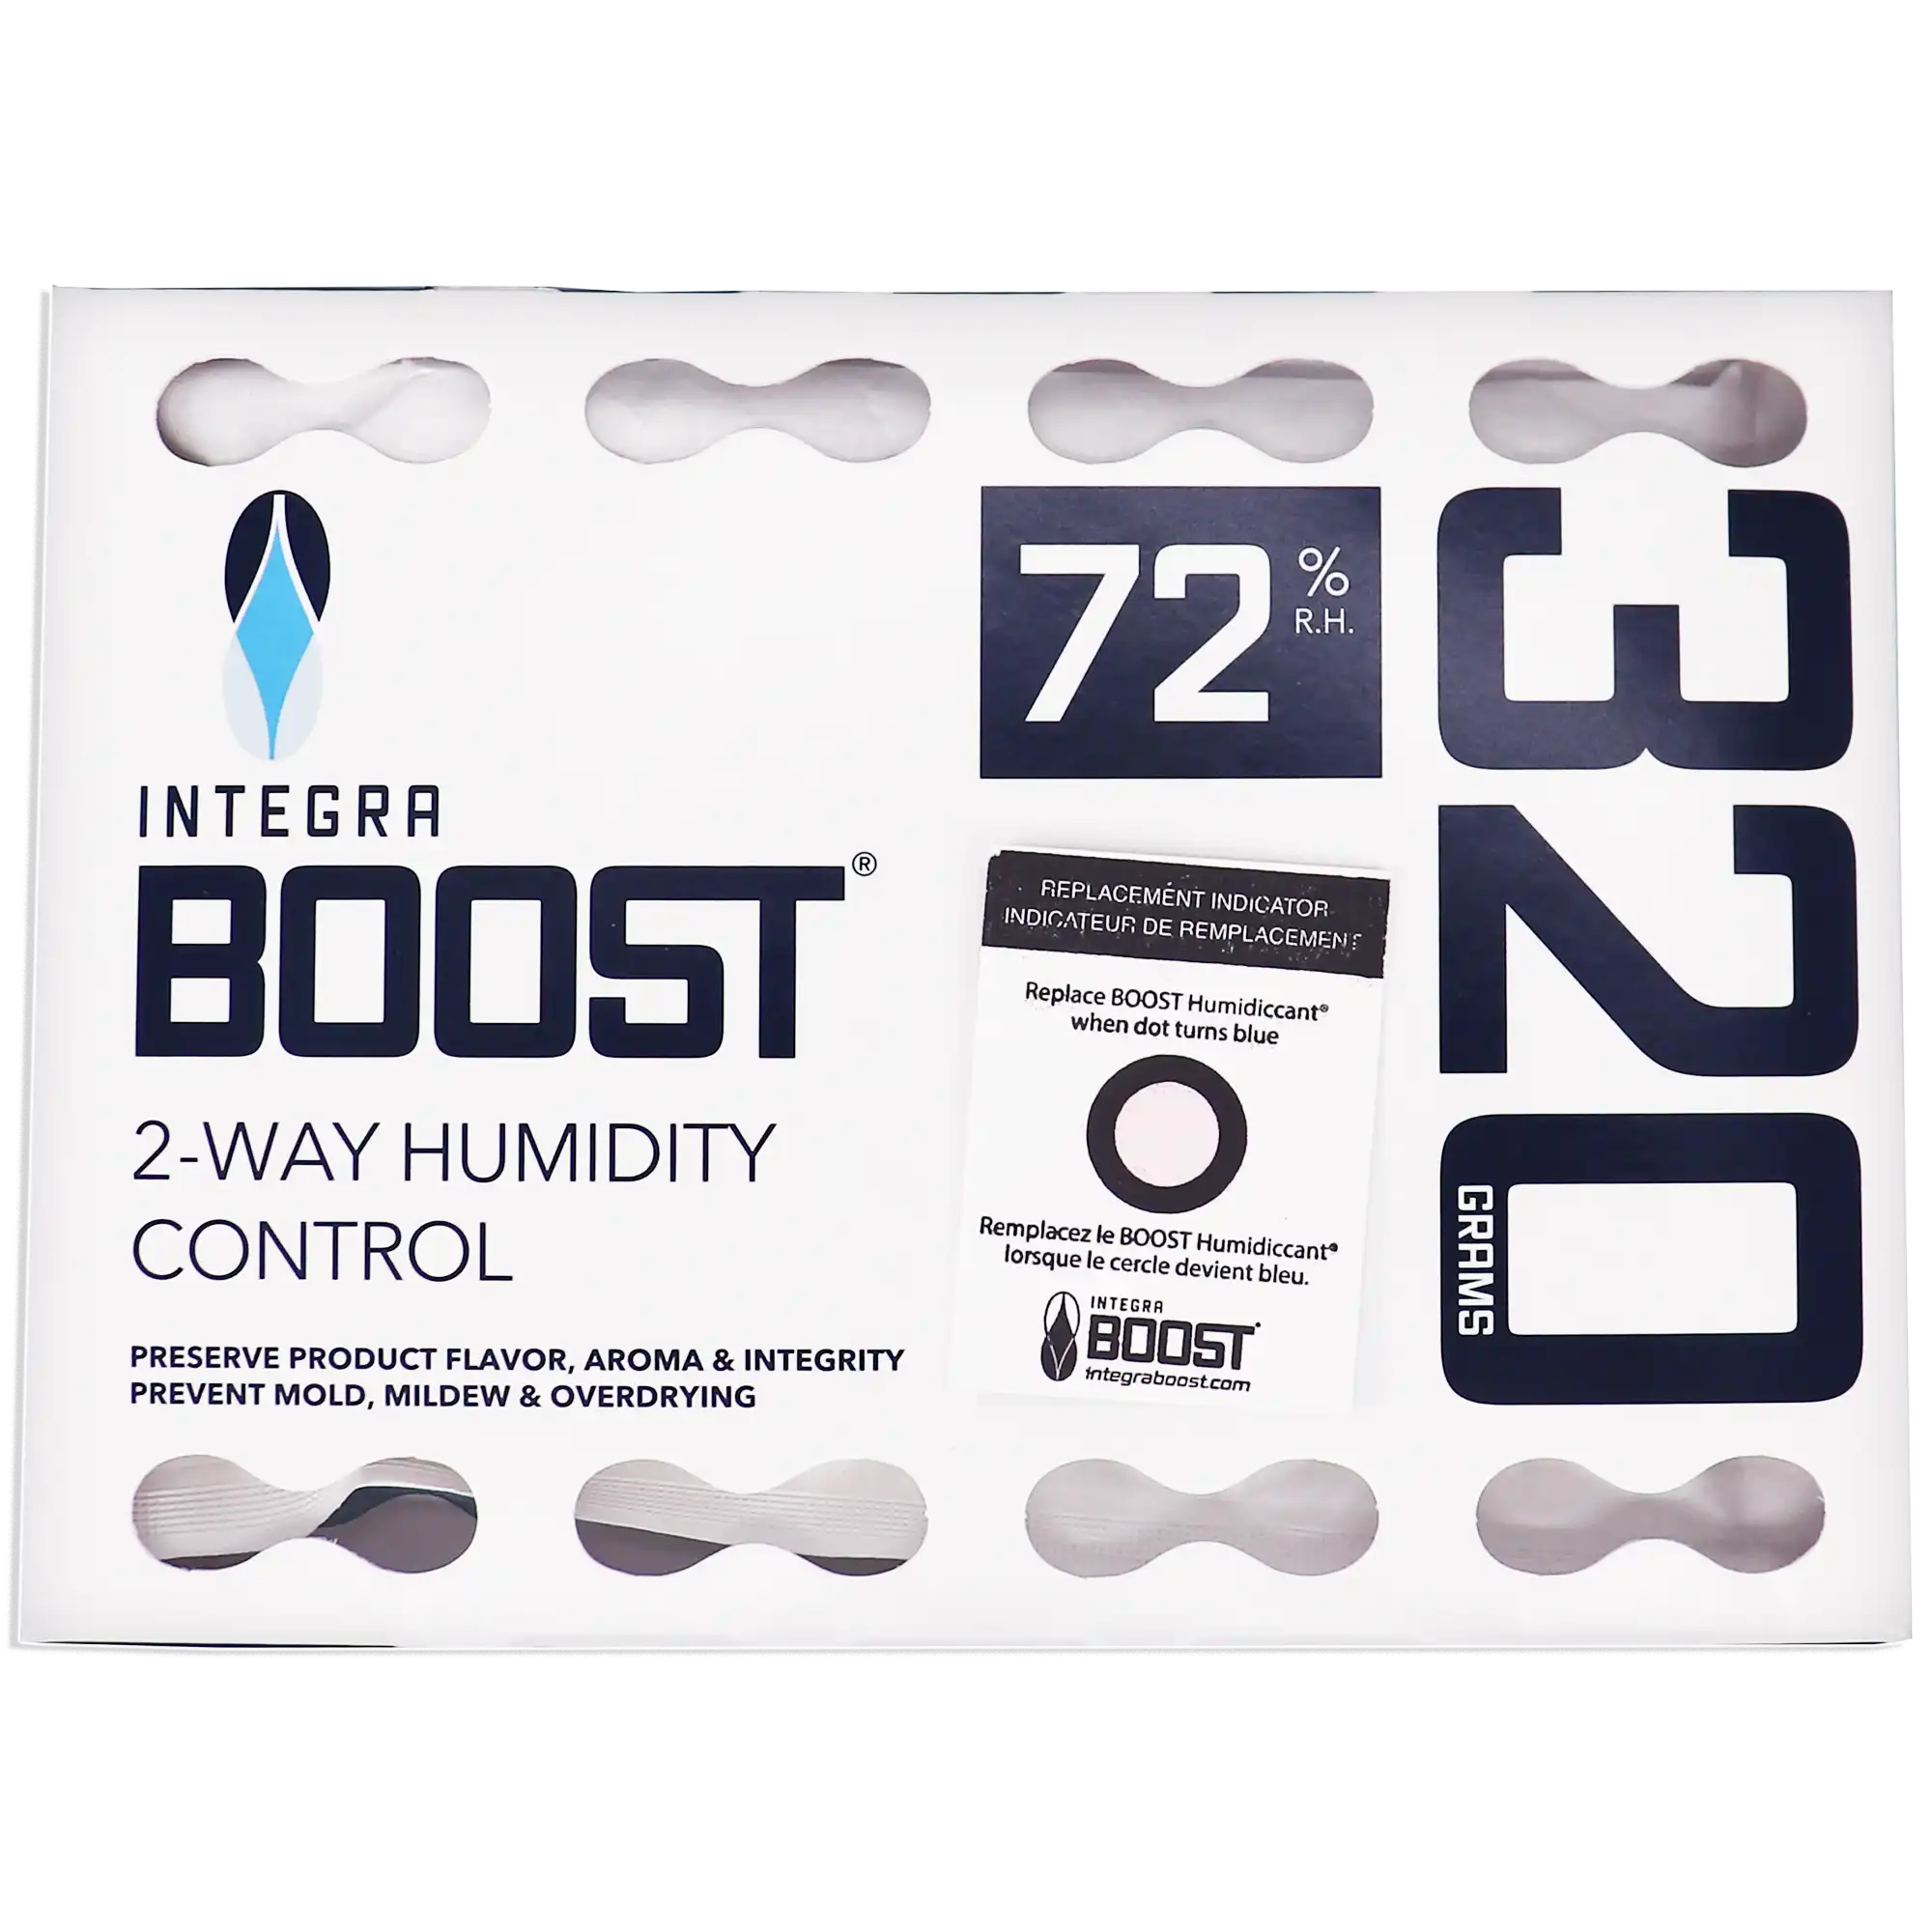 Integra Boost 320g Befeuchterpack 72% R.H.
